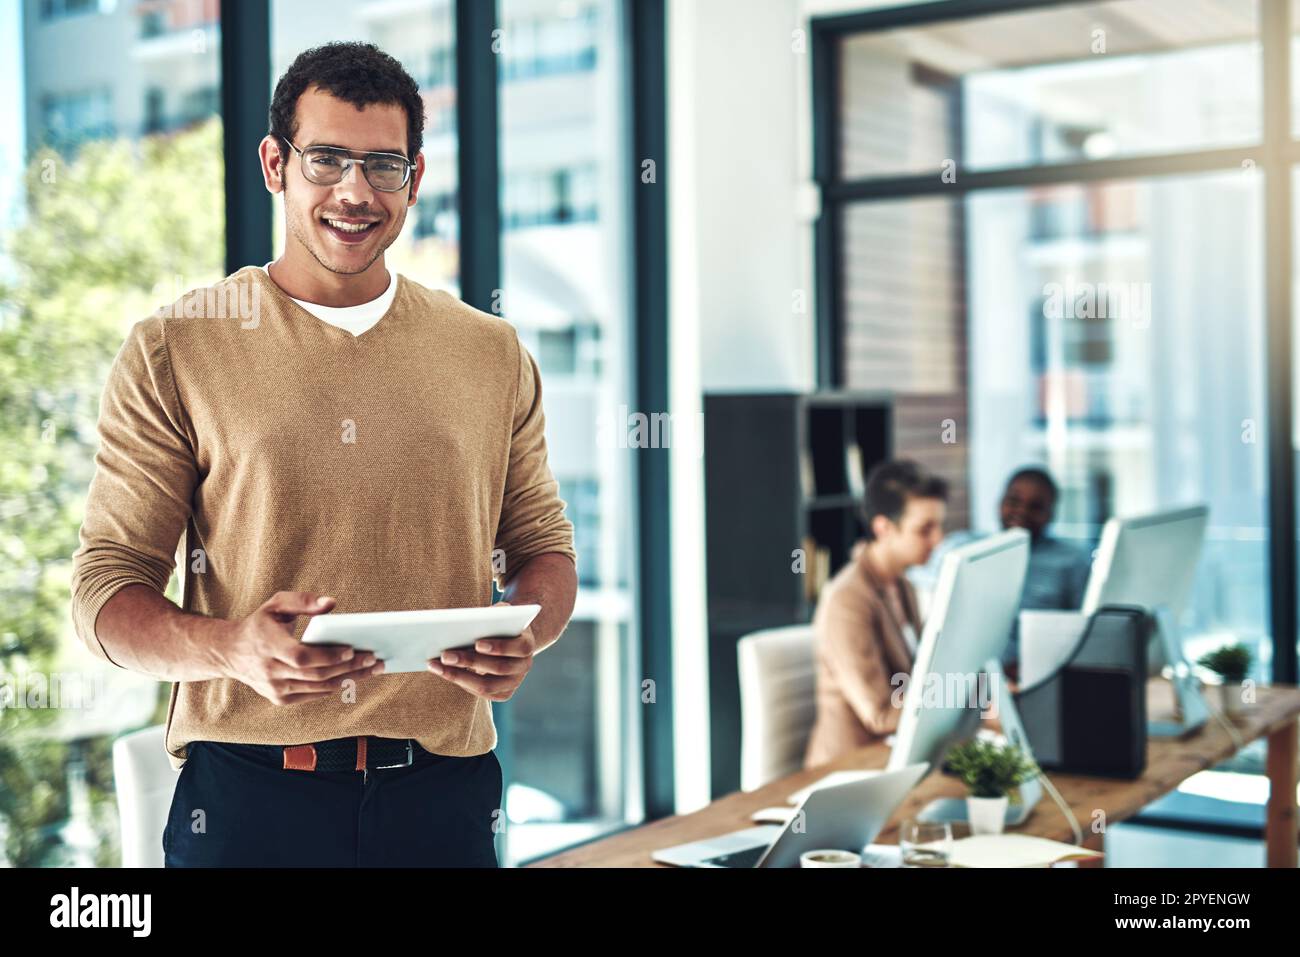 Technology can help you achieve your entrepreneurial dreams. a designer using his digital tablet with his colleagues blurred in the background. Stock Photo